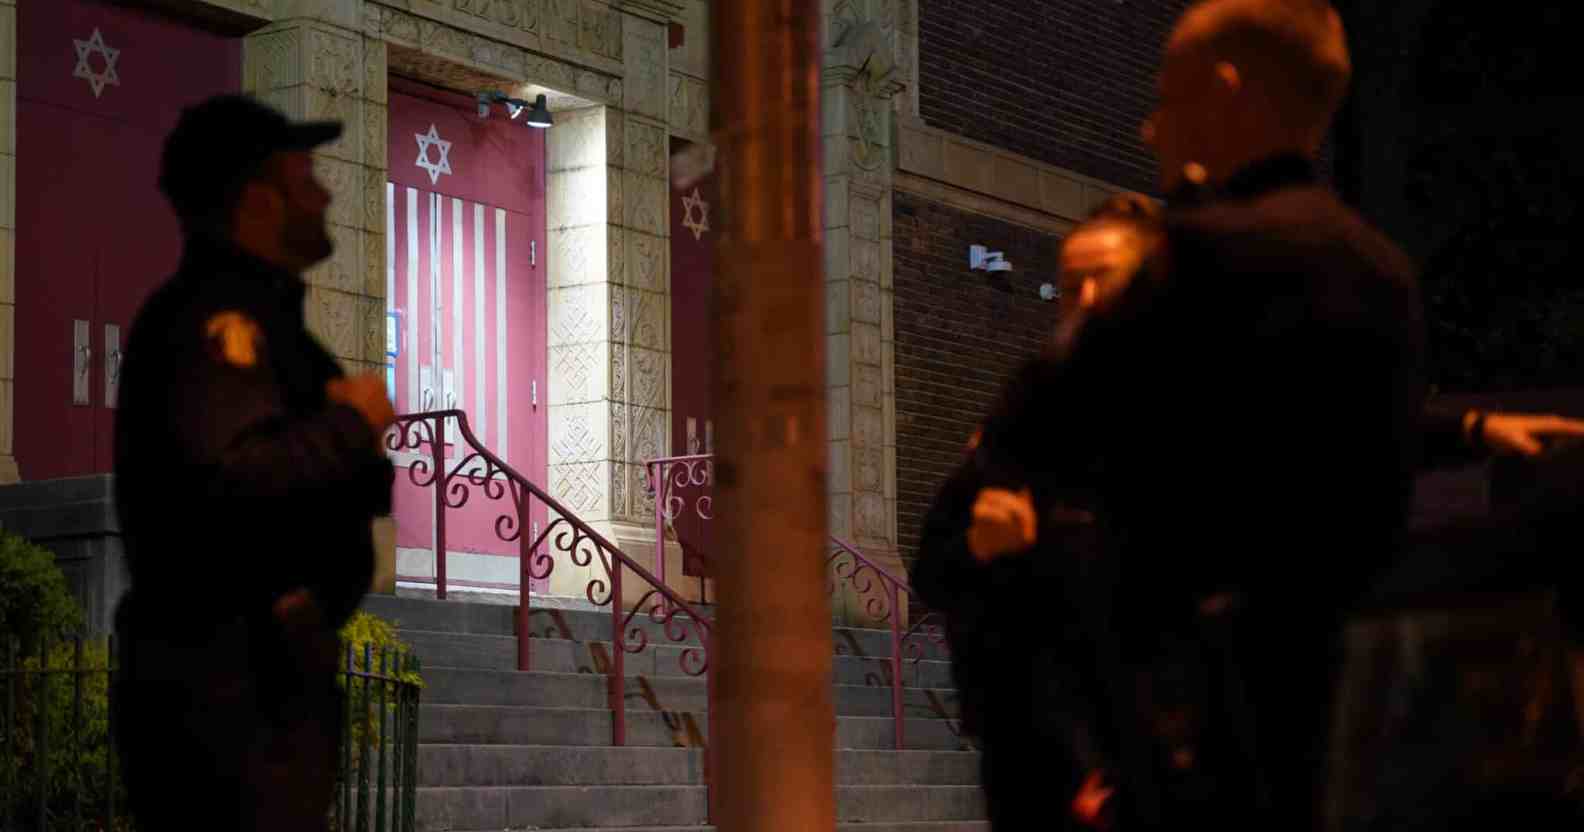 Police gather outside a synagogue in Newark, New Jersey, following the discovery of the manifesto